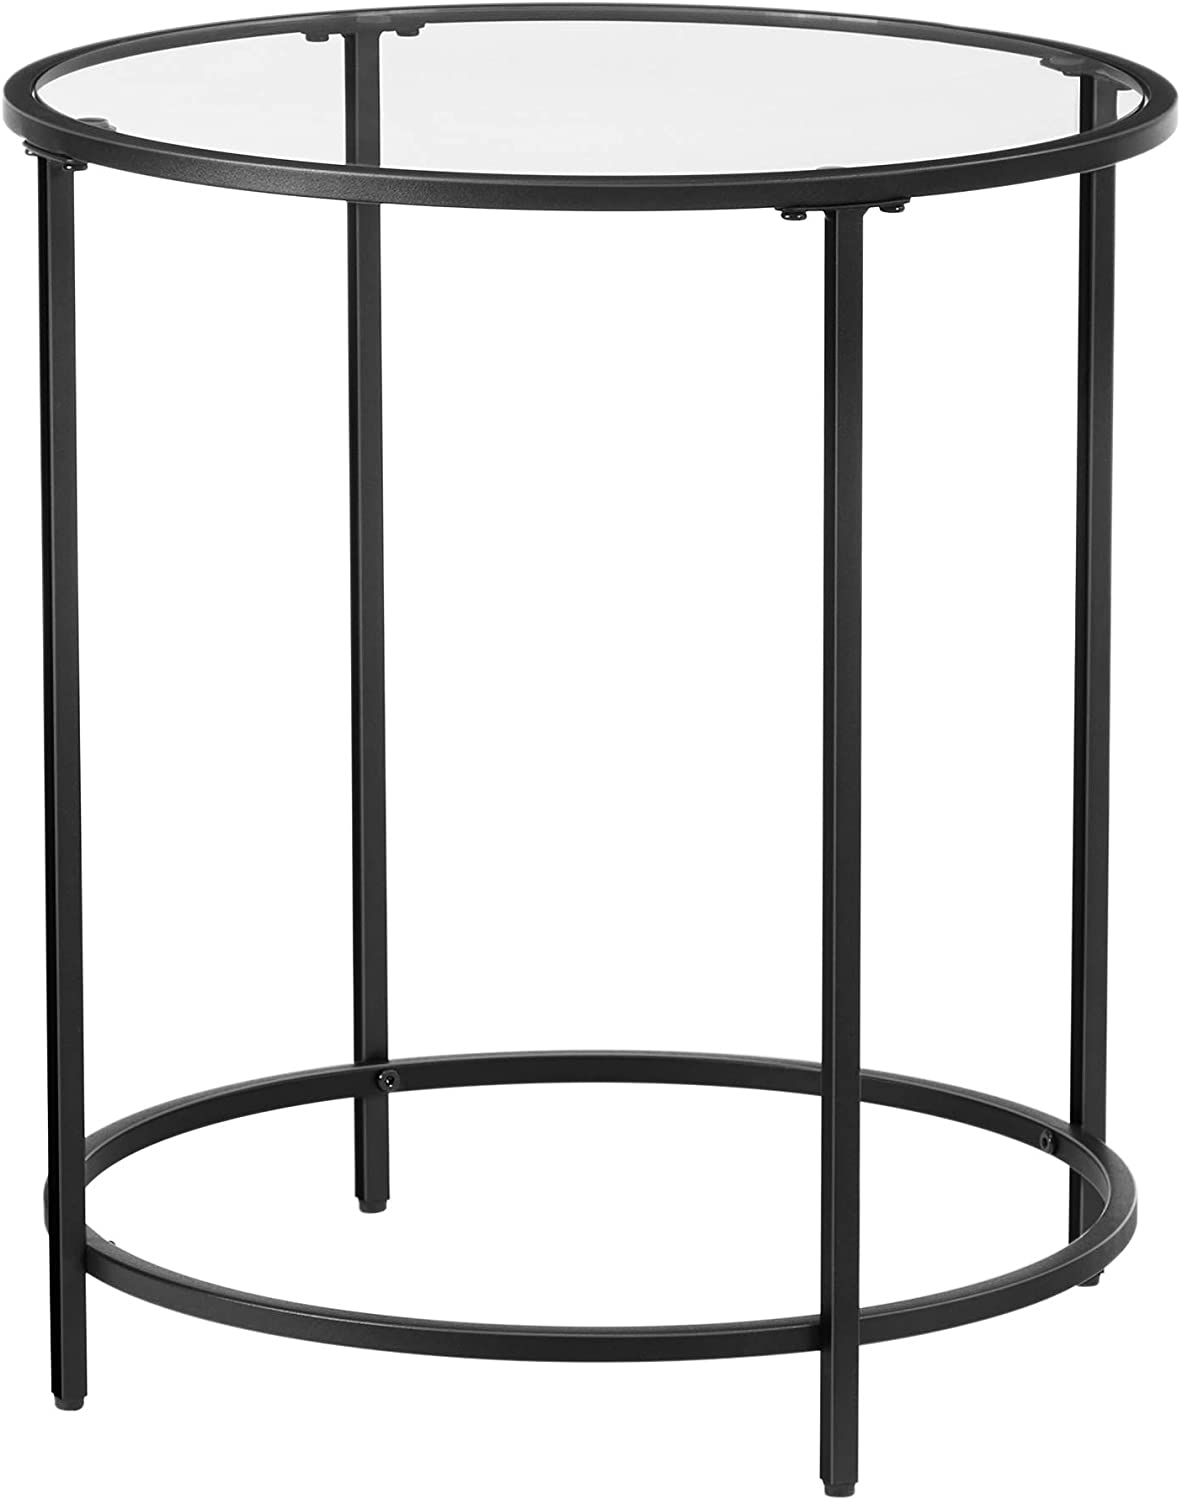 Round Side Table, Glass End Table with Metal Frame, Small Coffee Accent Table - HWLEXTRA 